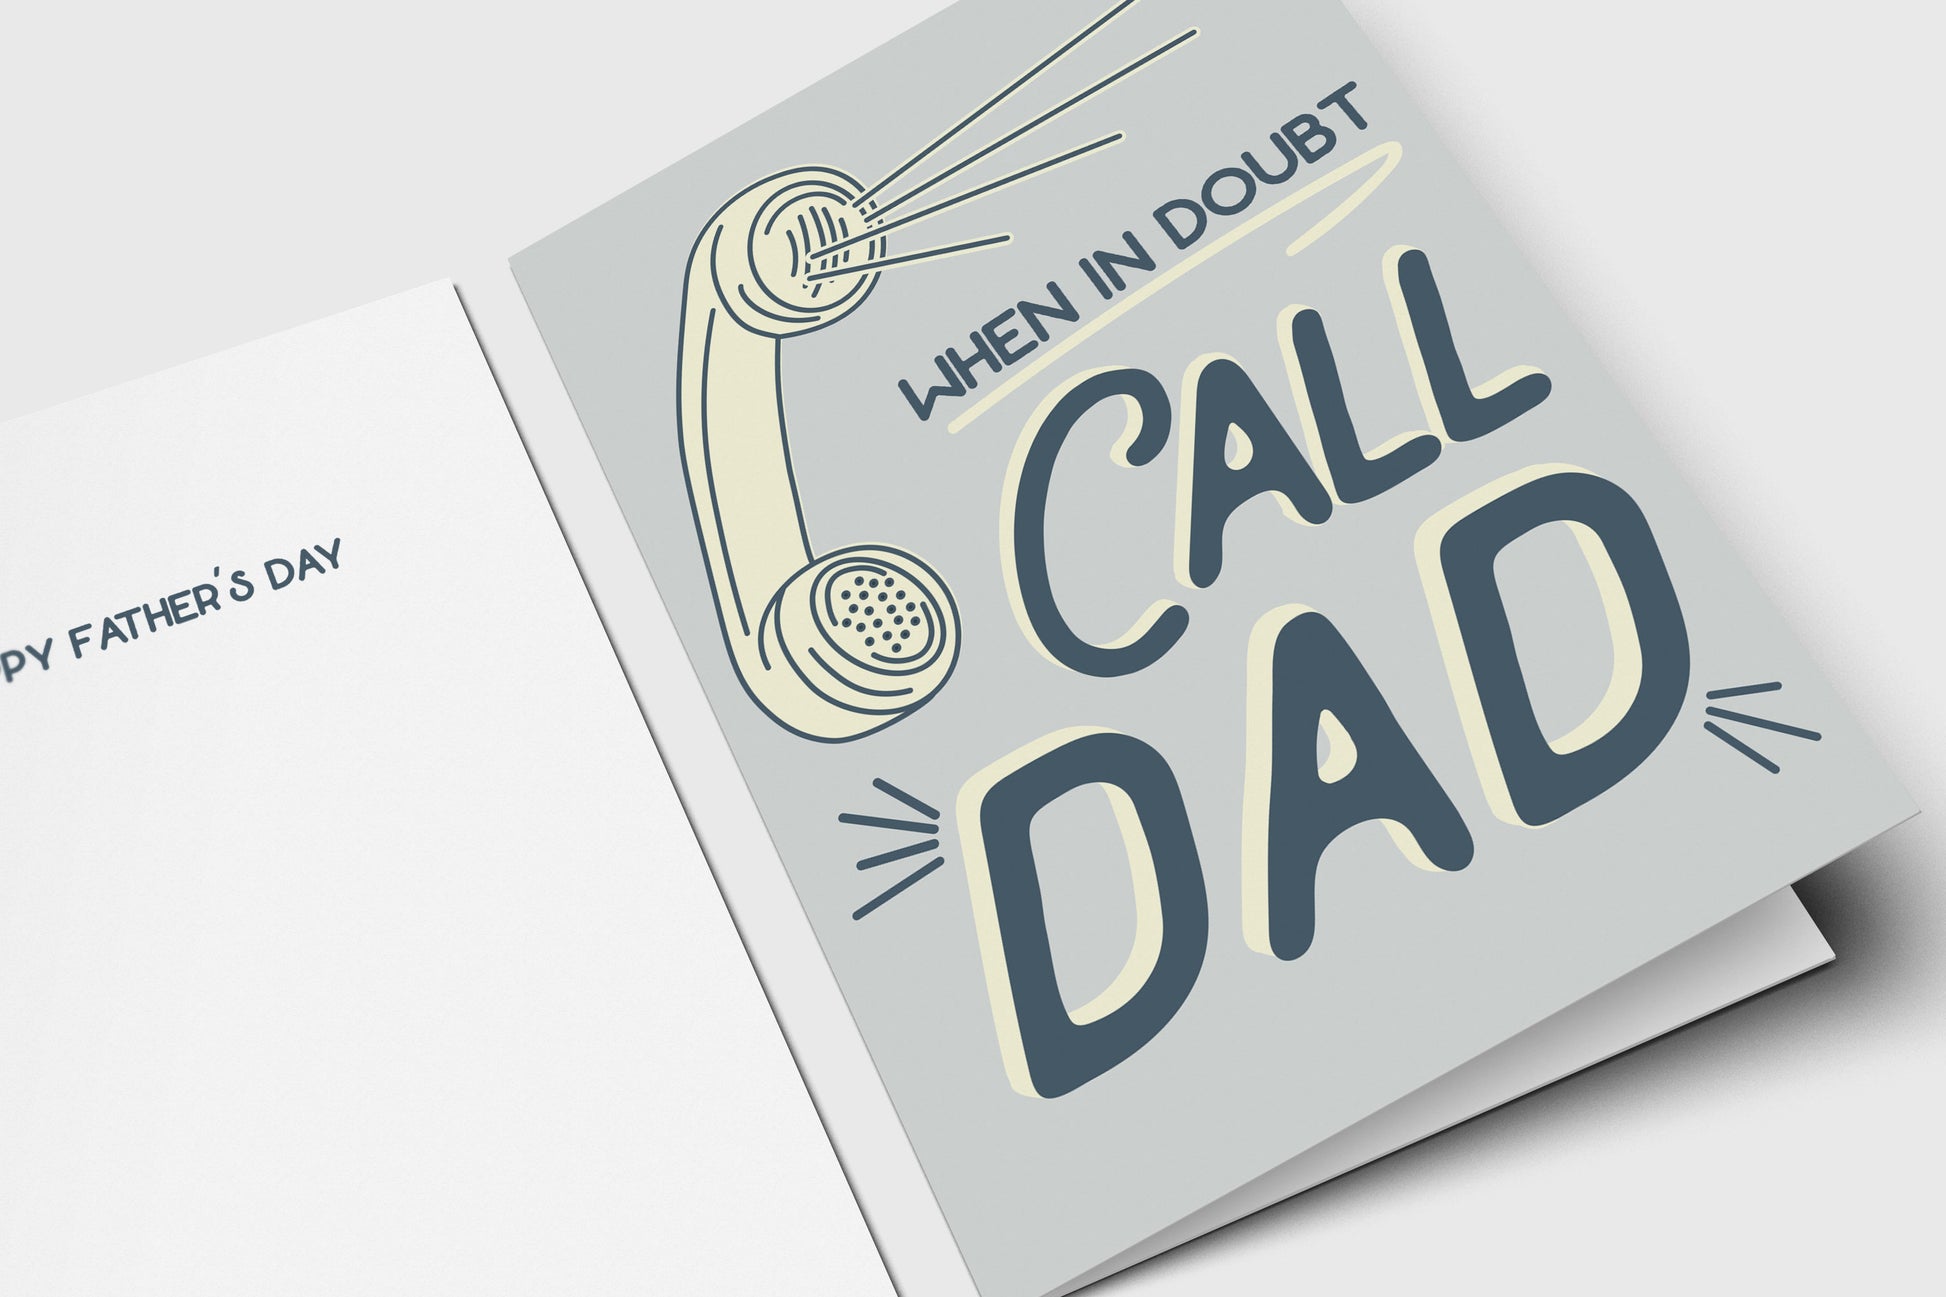 Father's Day Card | When In Doubt Call Dad - Folded - Wishing You a Happy Father's Day - Father's Day Gift Idea - Funny - Unique Card